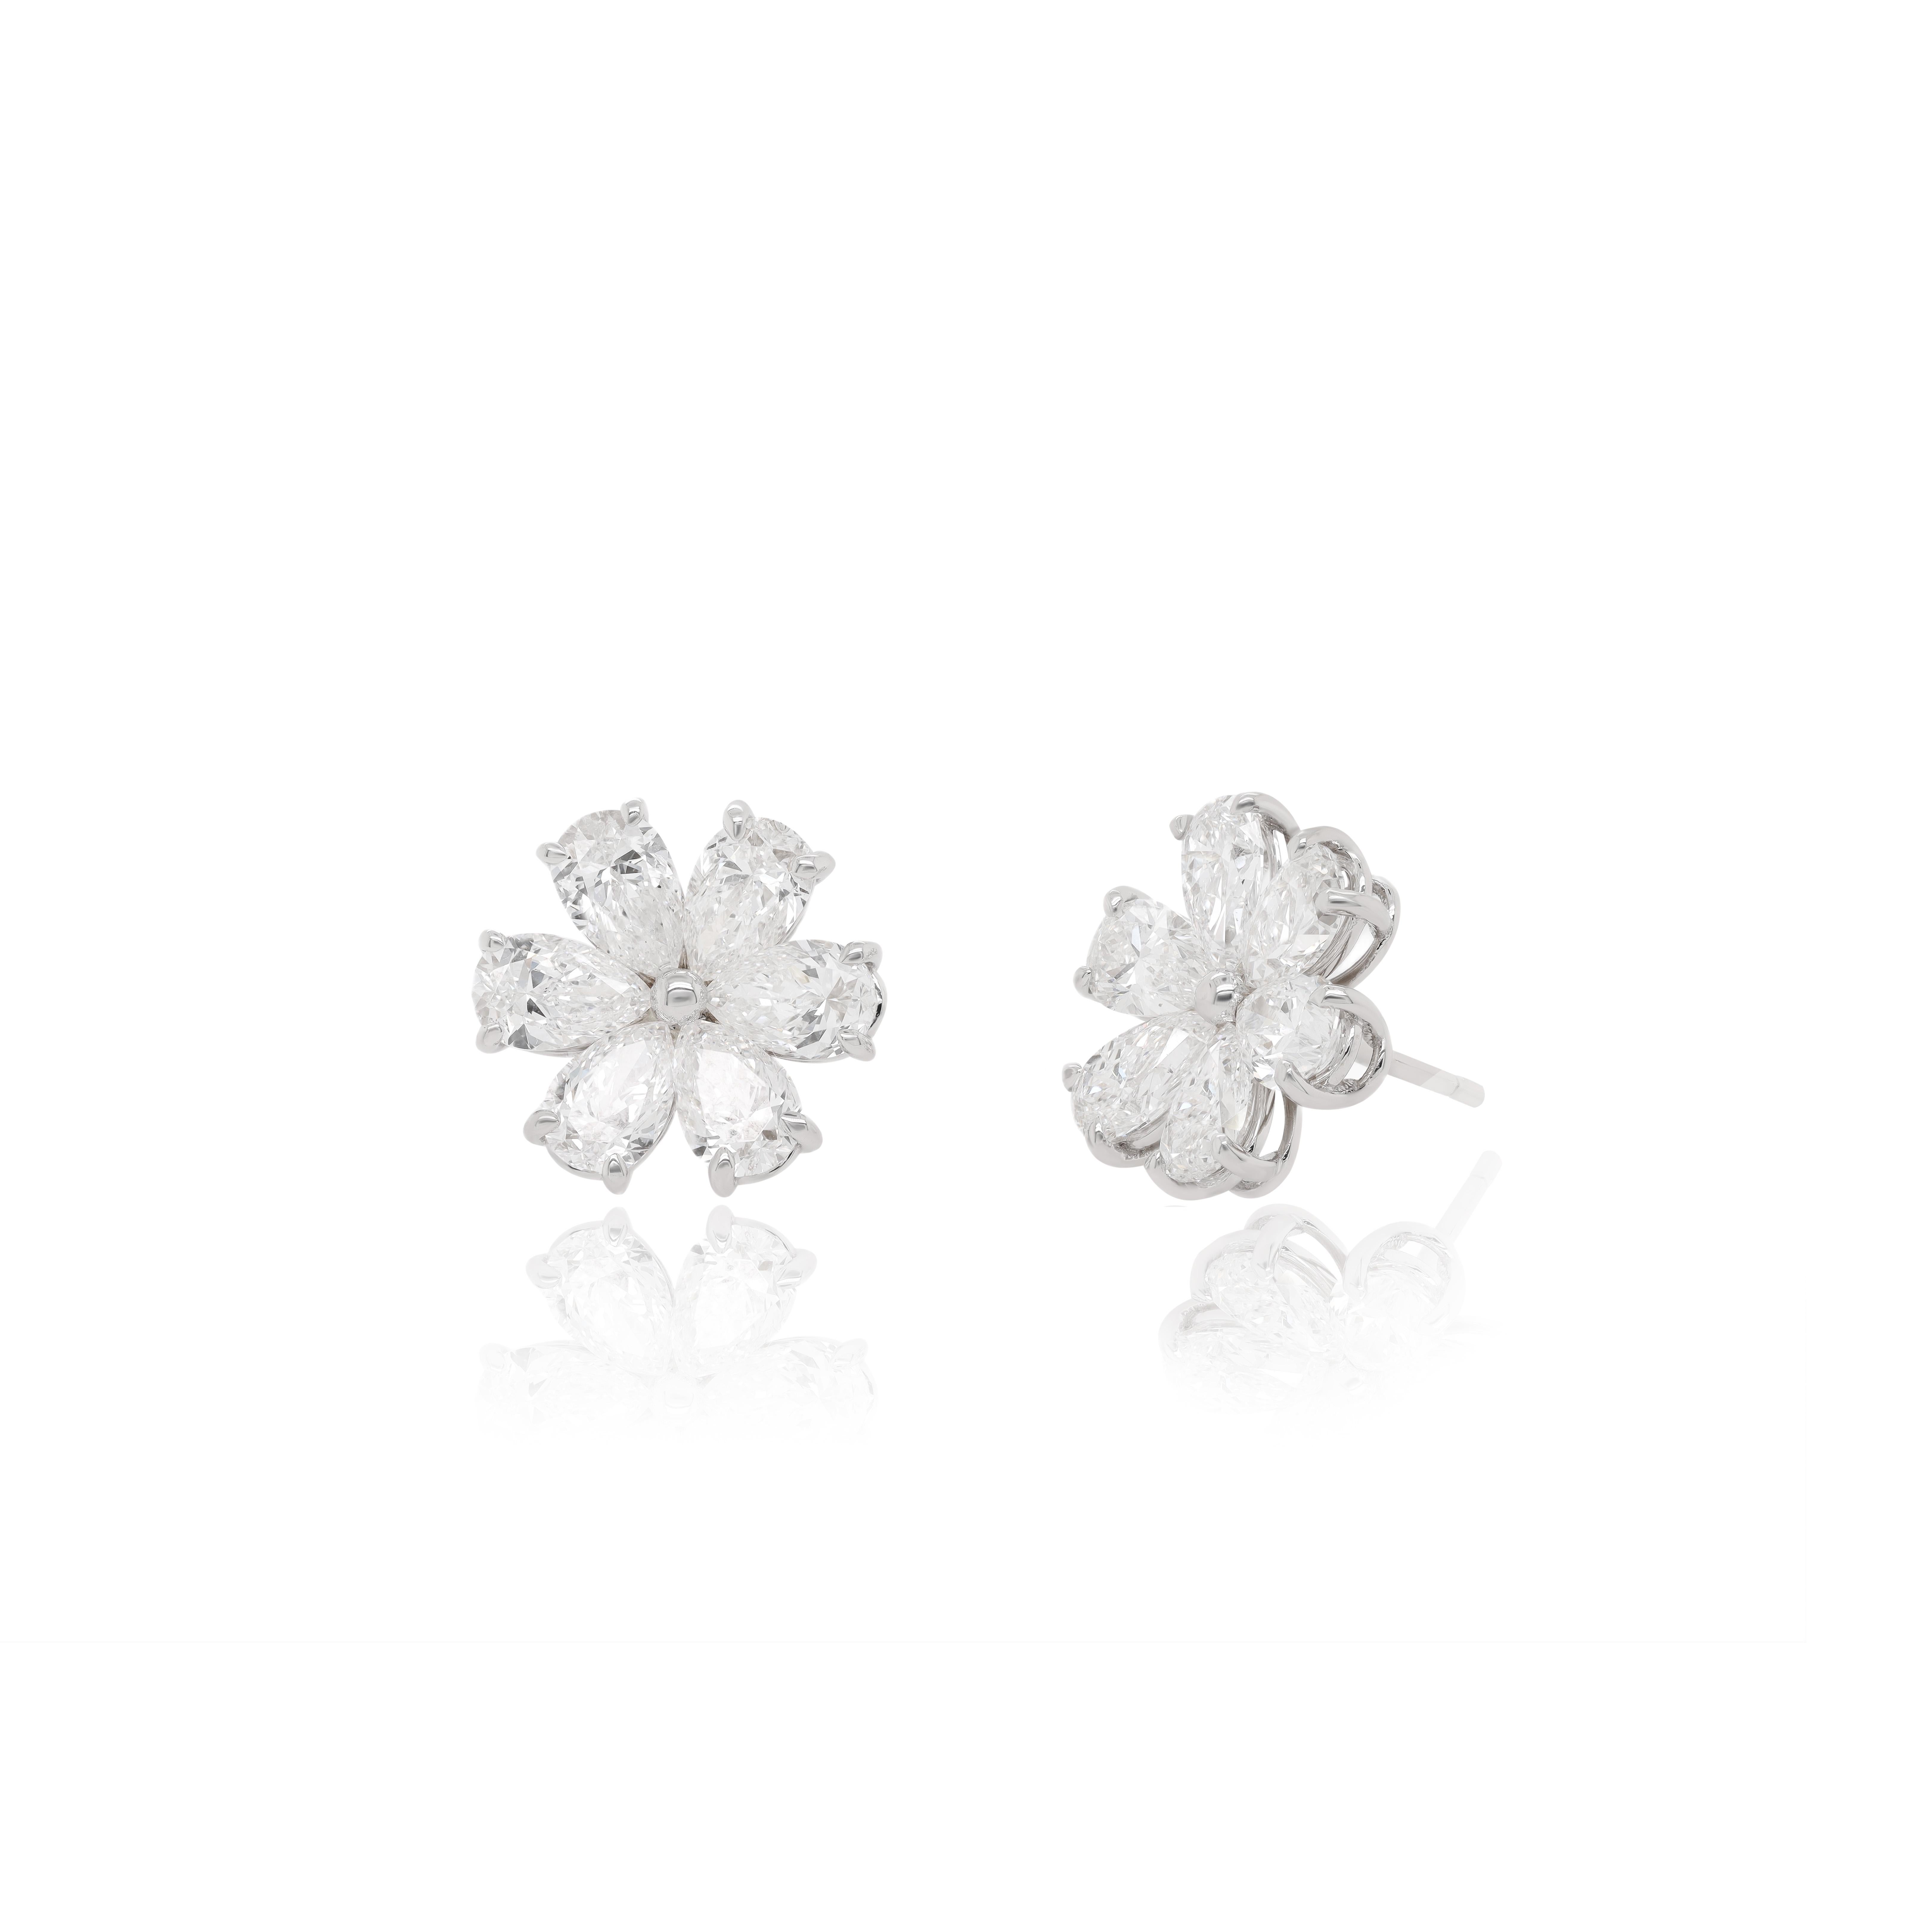 Diana M. 6.05 Carat Flower Cluster Diamond Earrings In New Condition For Sale In New York, NY